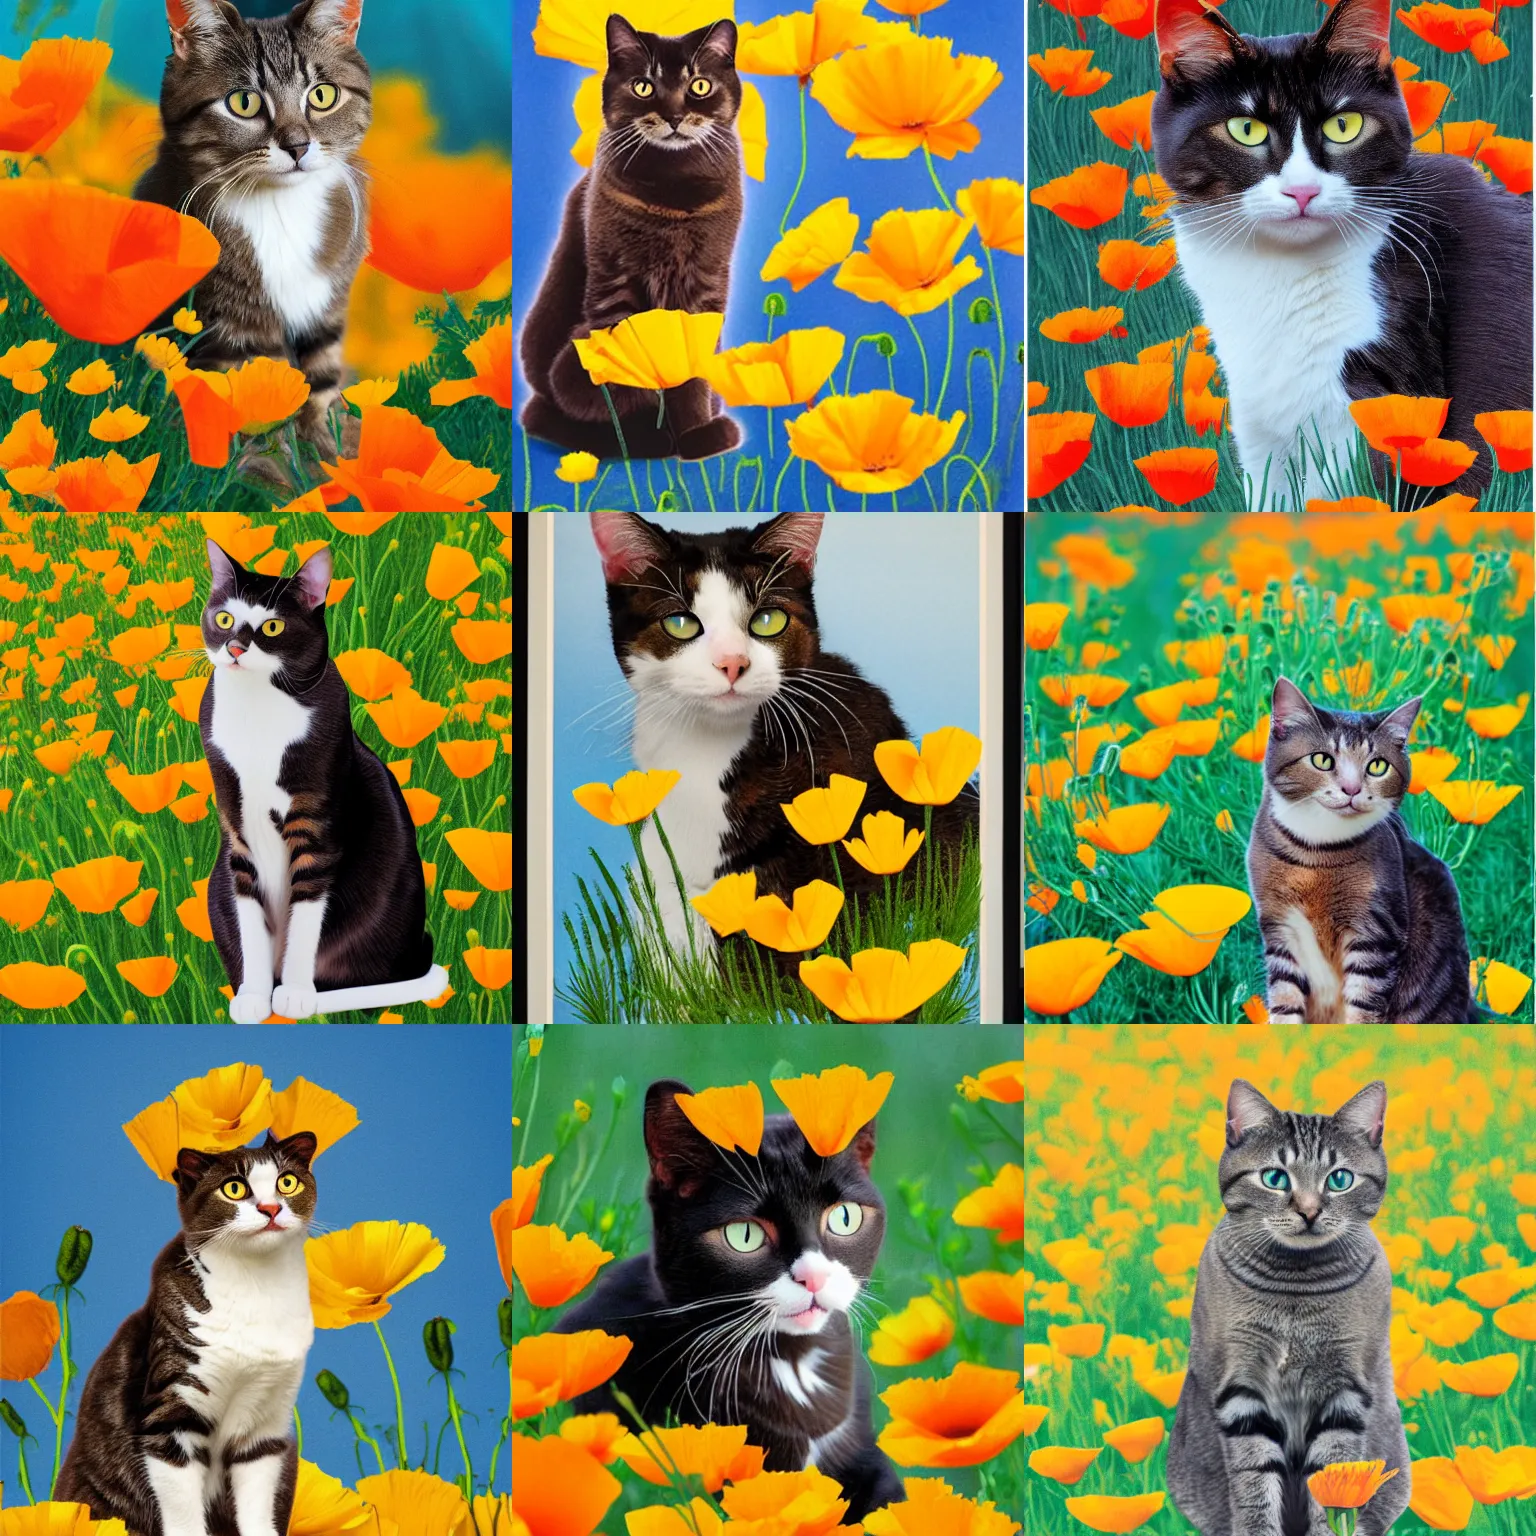 Prompt: poster image of a cat sitting in california poppies